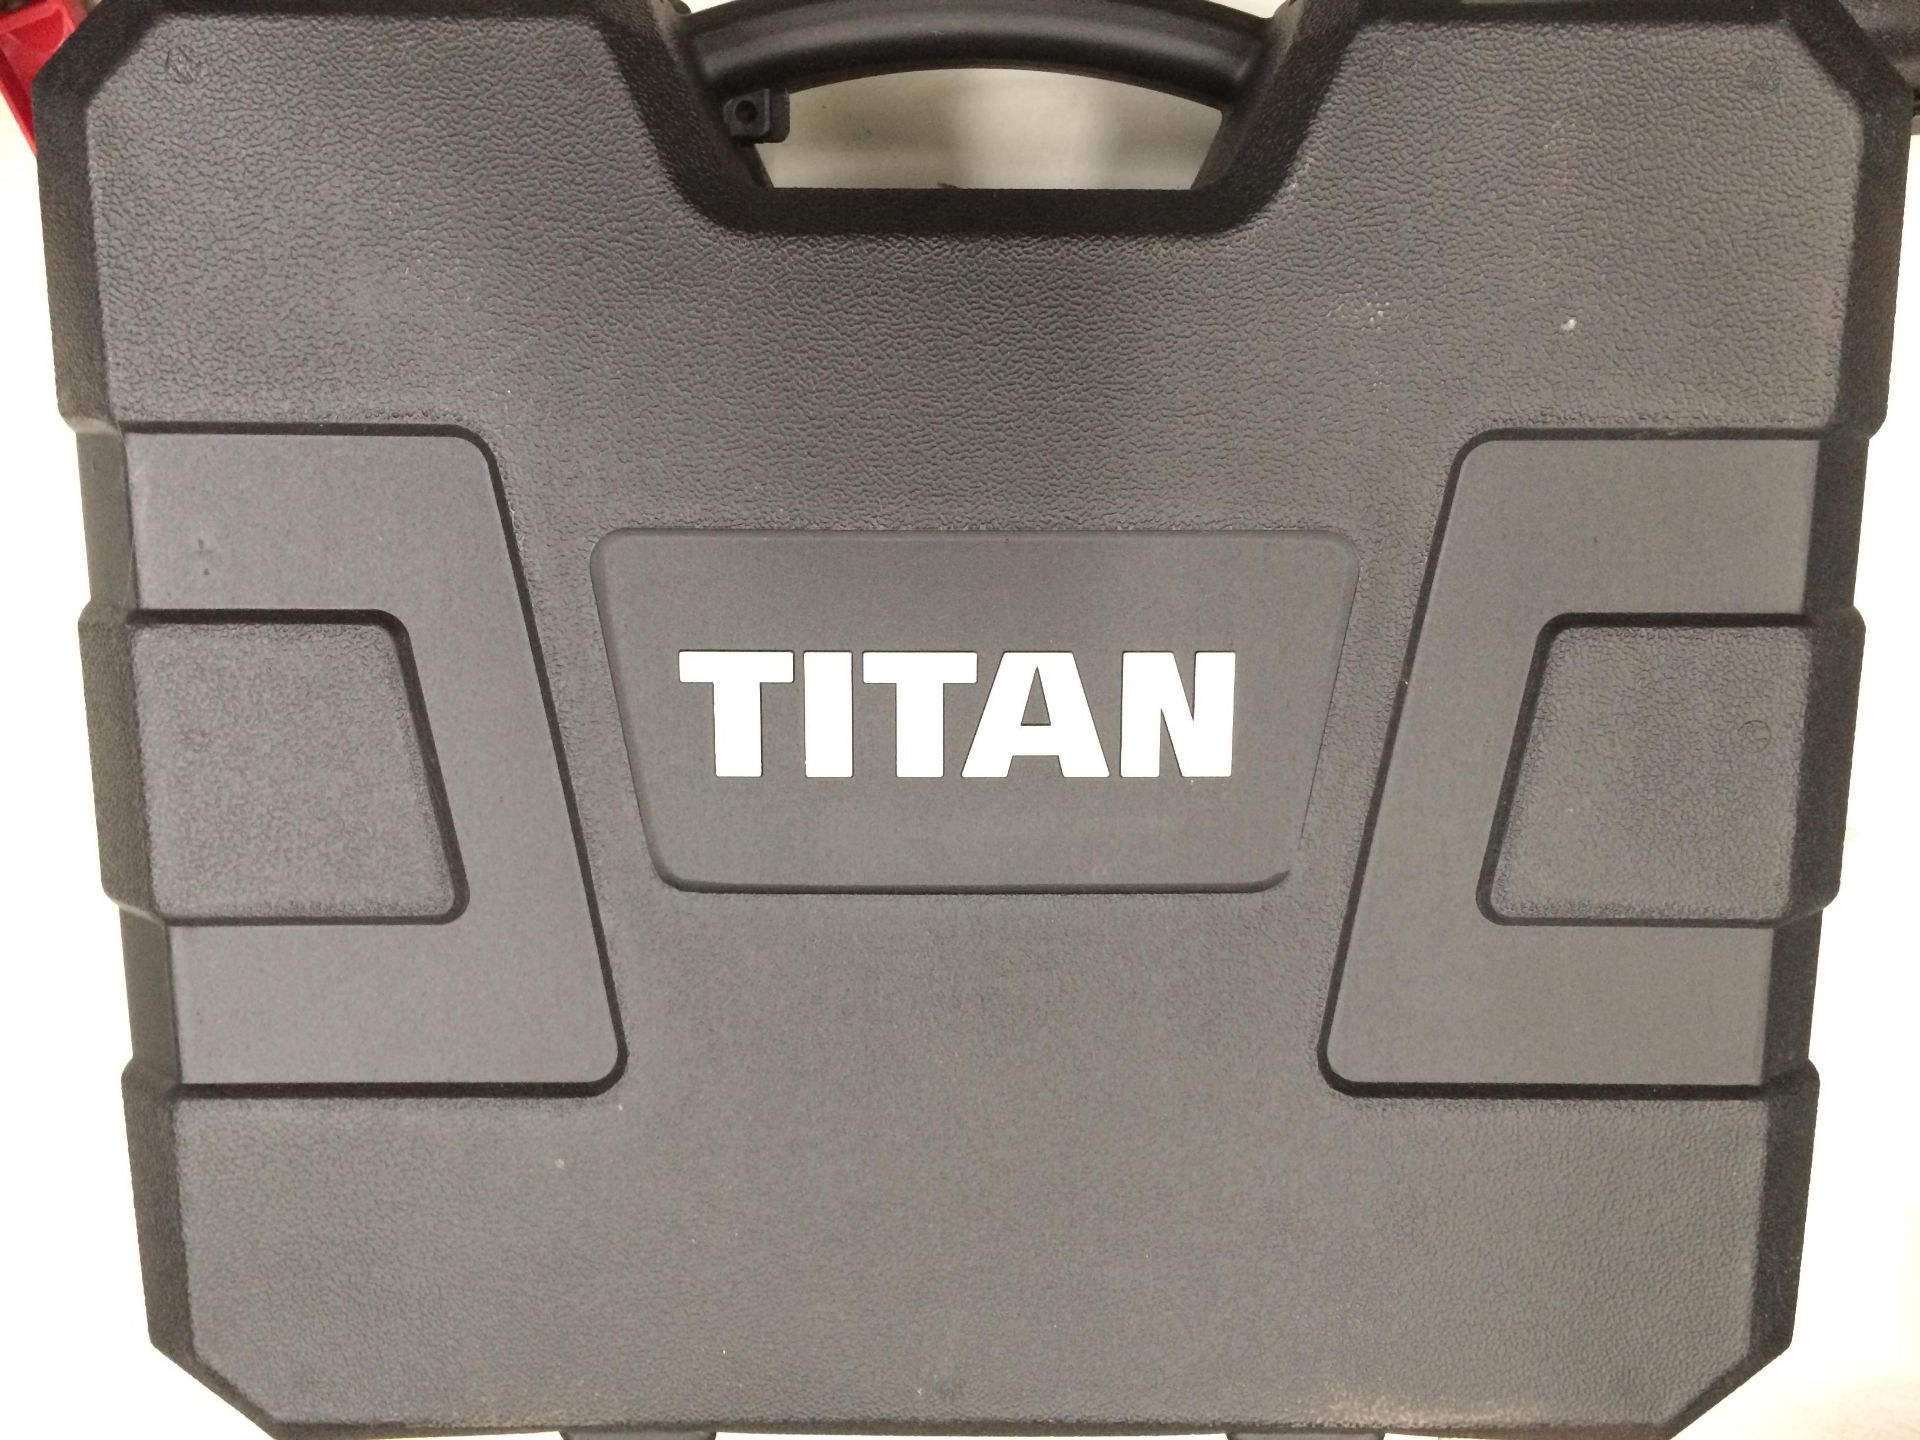 Titan TTB6315DS 1500w SDS Plus Rotary hammer drill 240v in case complete with SDS bits etc. - Image 2 of 2